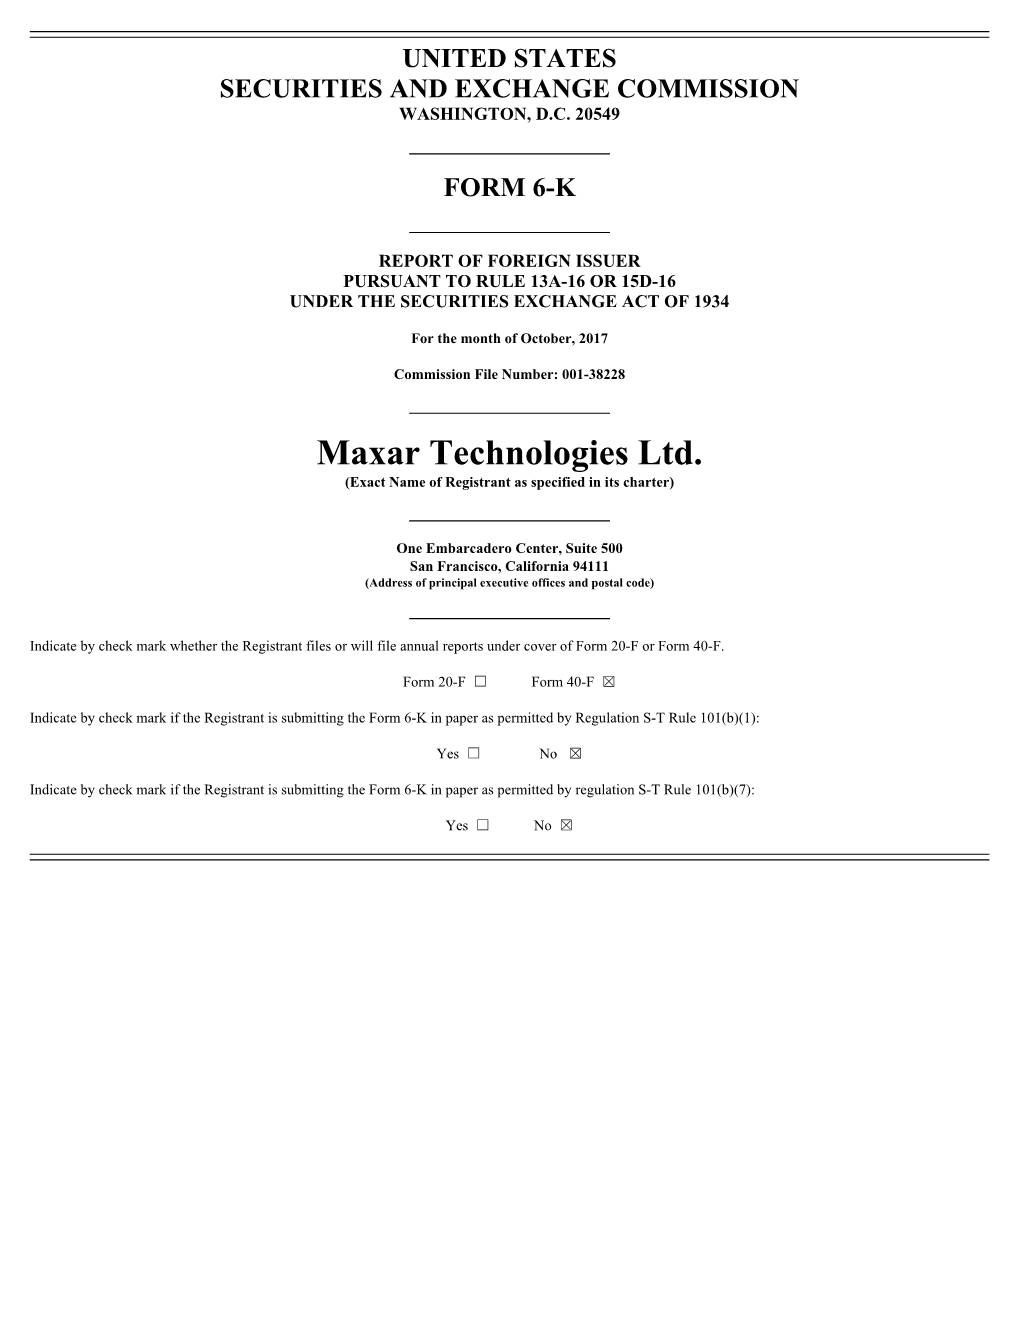 Maxar Technologies Ltd. (Exact Name of Registrant As Specified in Its Charter)